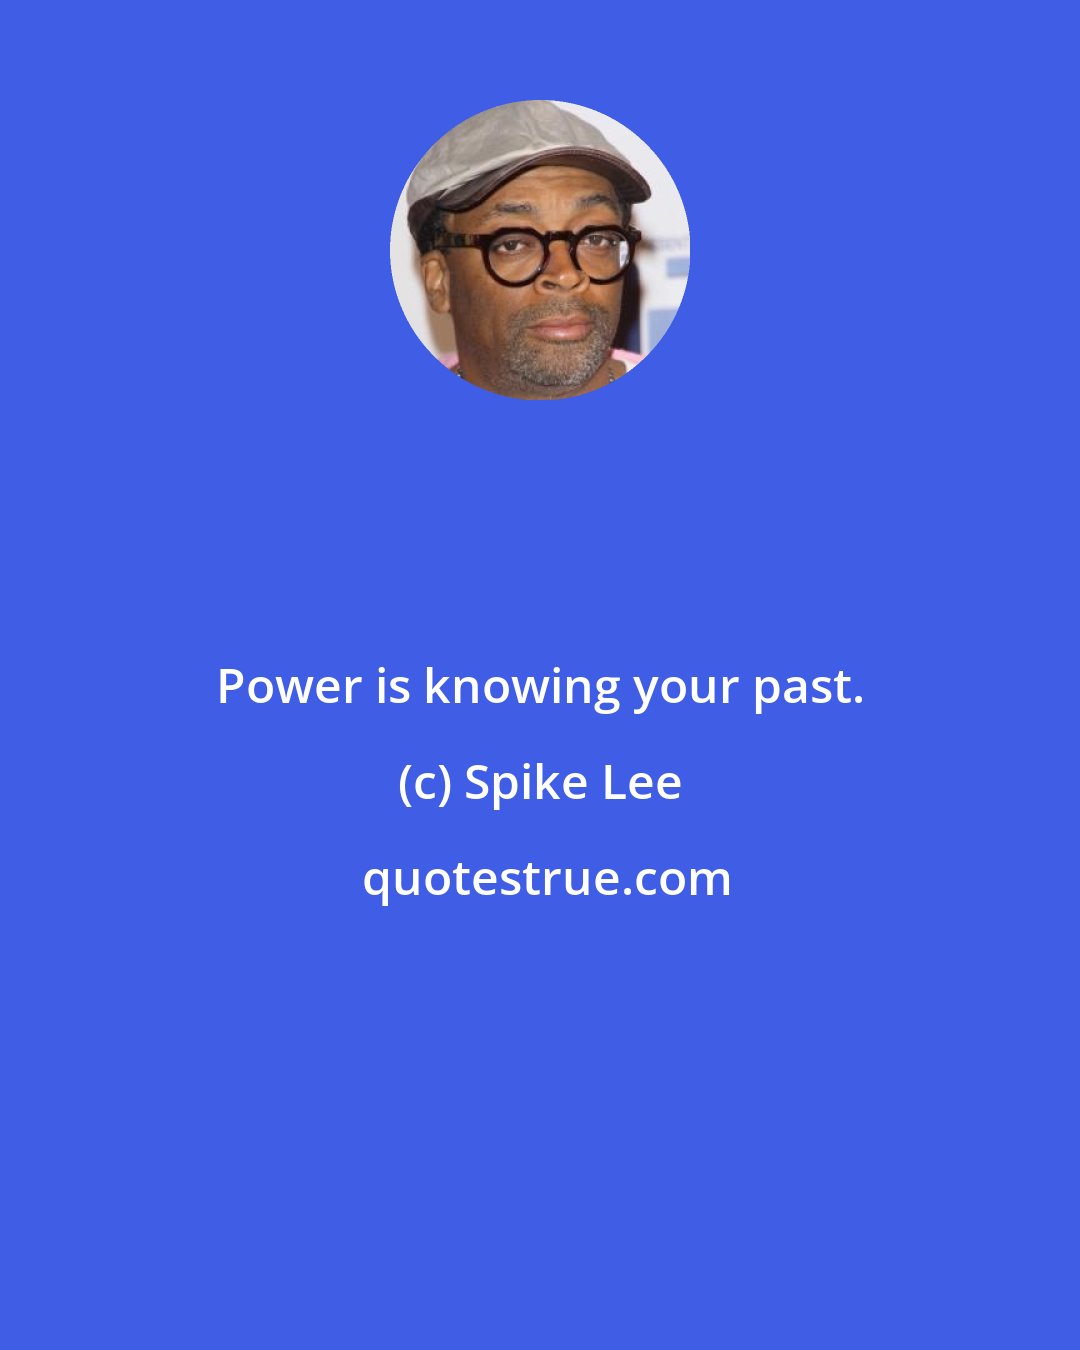 Spike Lee: Power is knowing your past.